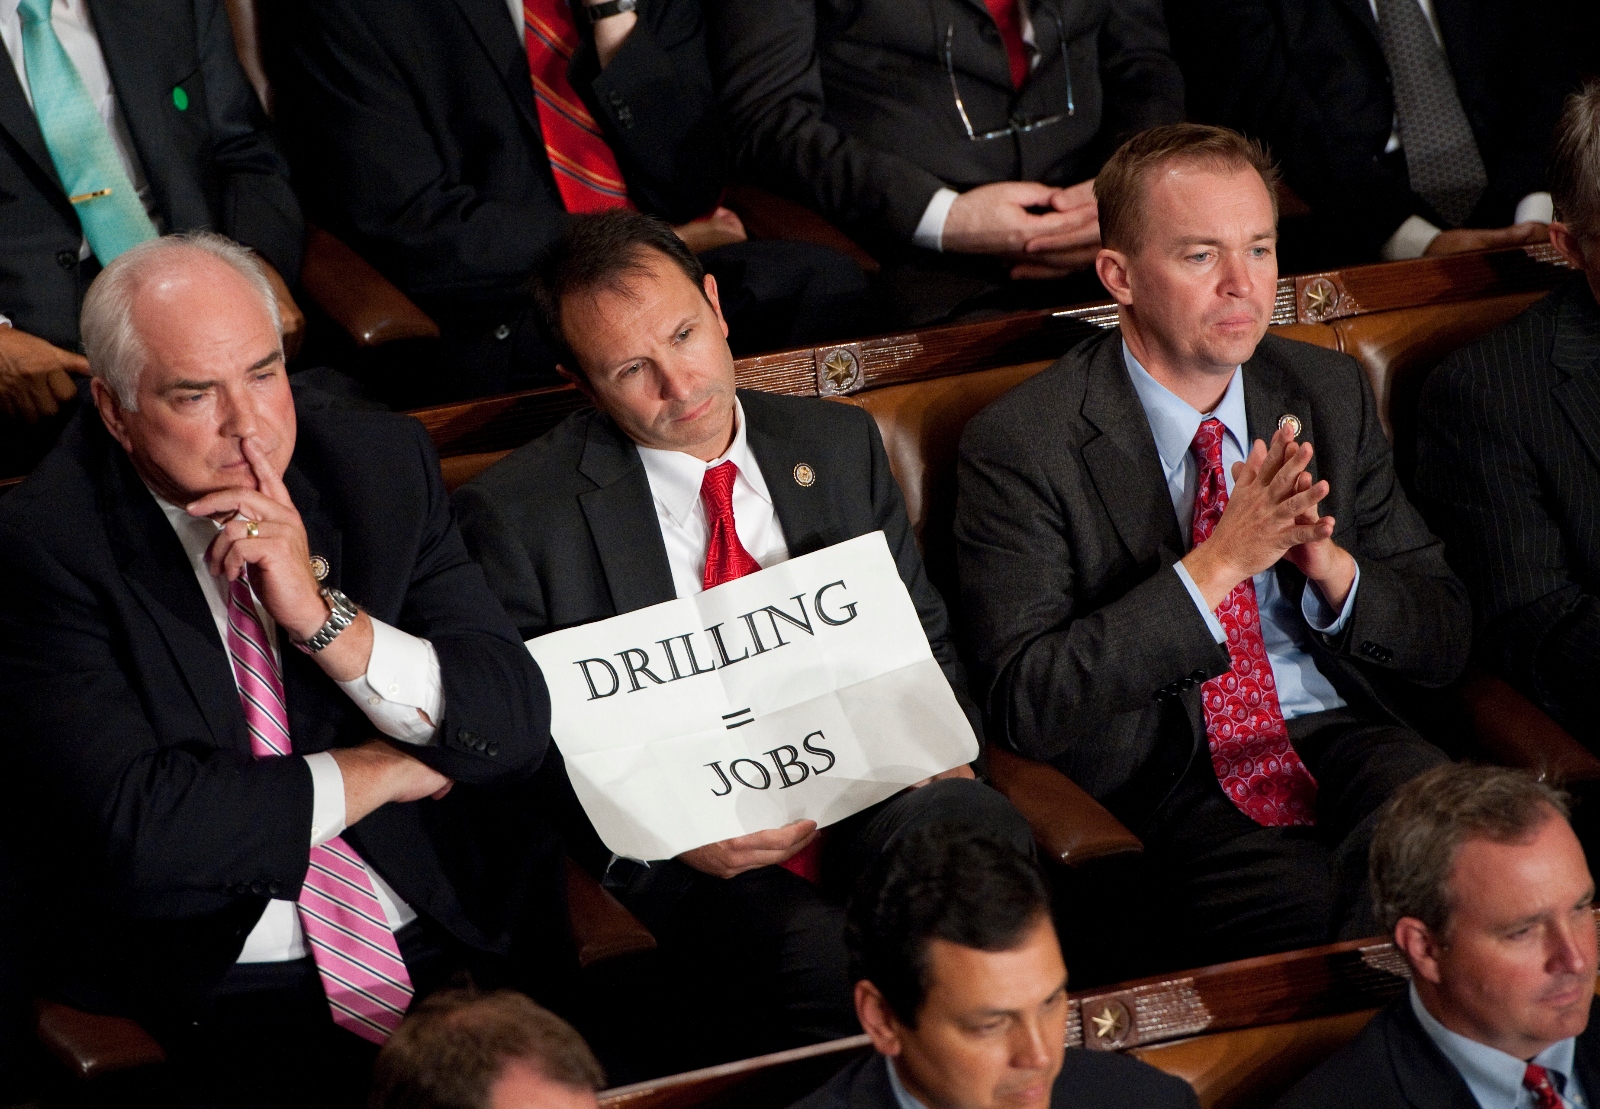 Jeff Landry, then a member of Congress, holds up a sign that reads "DRILLING = JOBS" during an address by then-President Barack Obama in 2011. Landry defended the oil industry in the aftermath of the Deepwater Horizon spill.